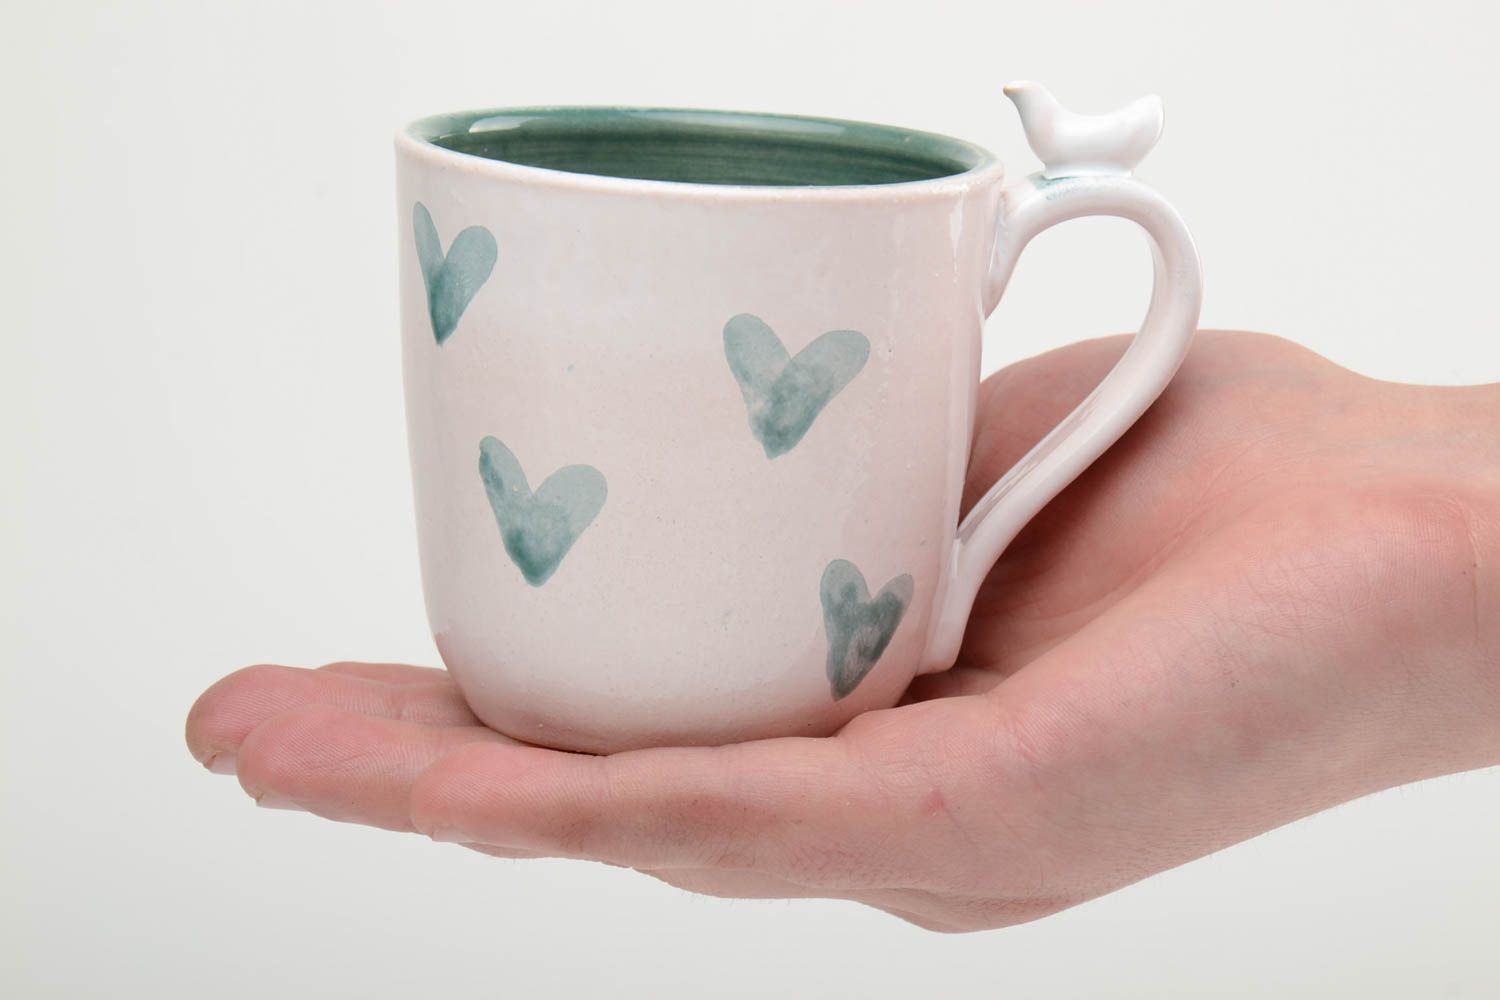 10 oz white and green ceramic cup with handle and green hearts' pattern photo 5